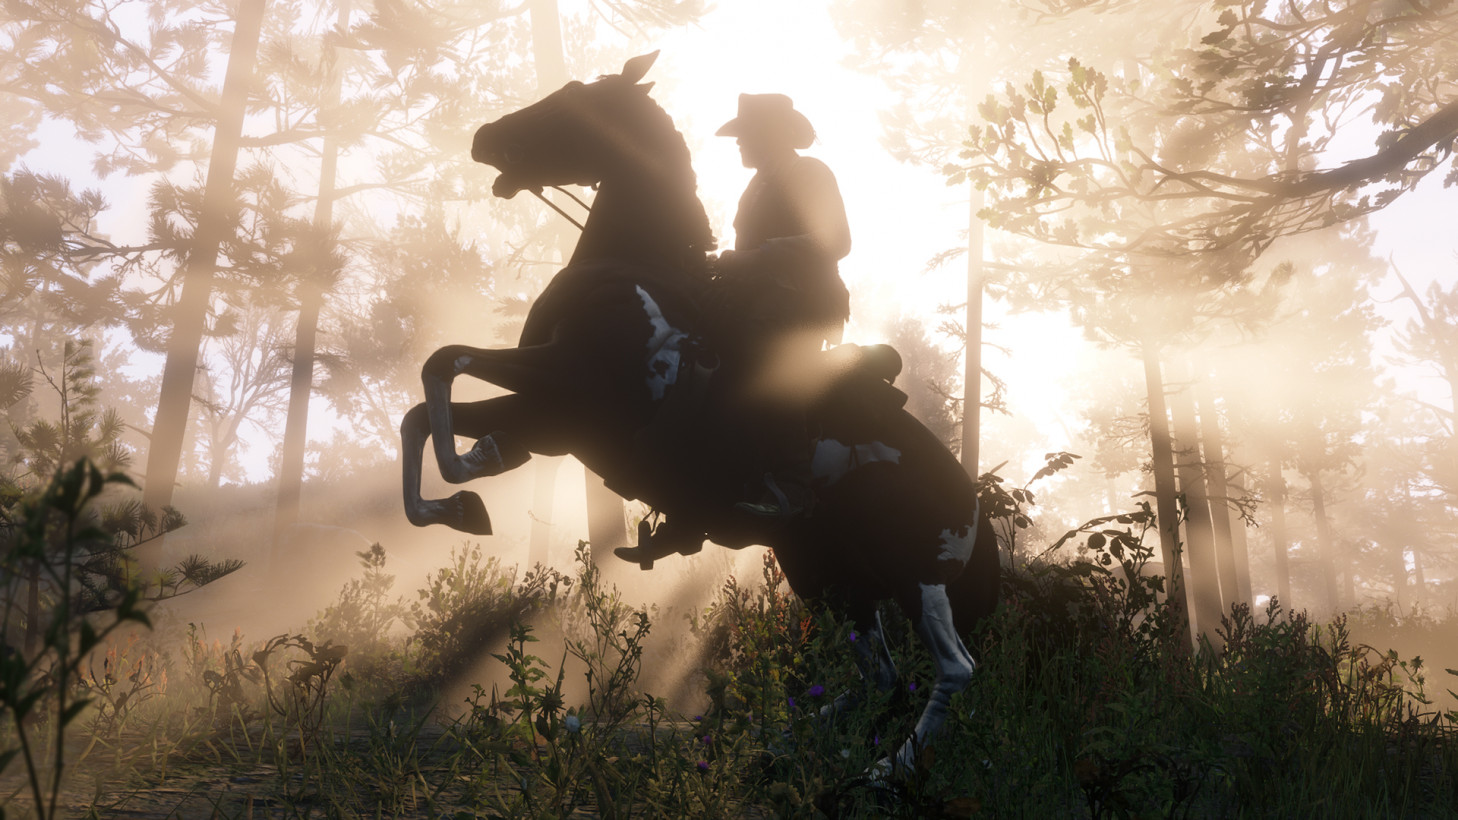 Red Dead Redemption 2 review